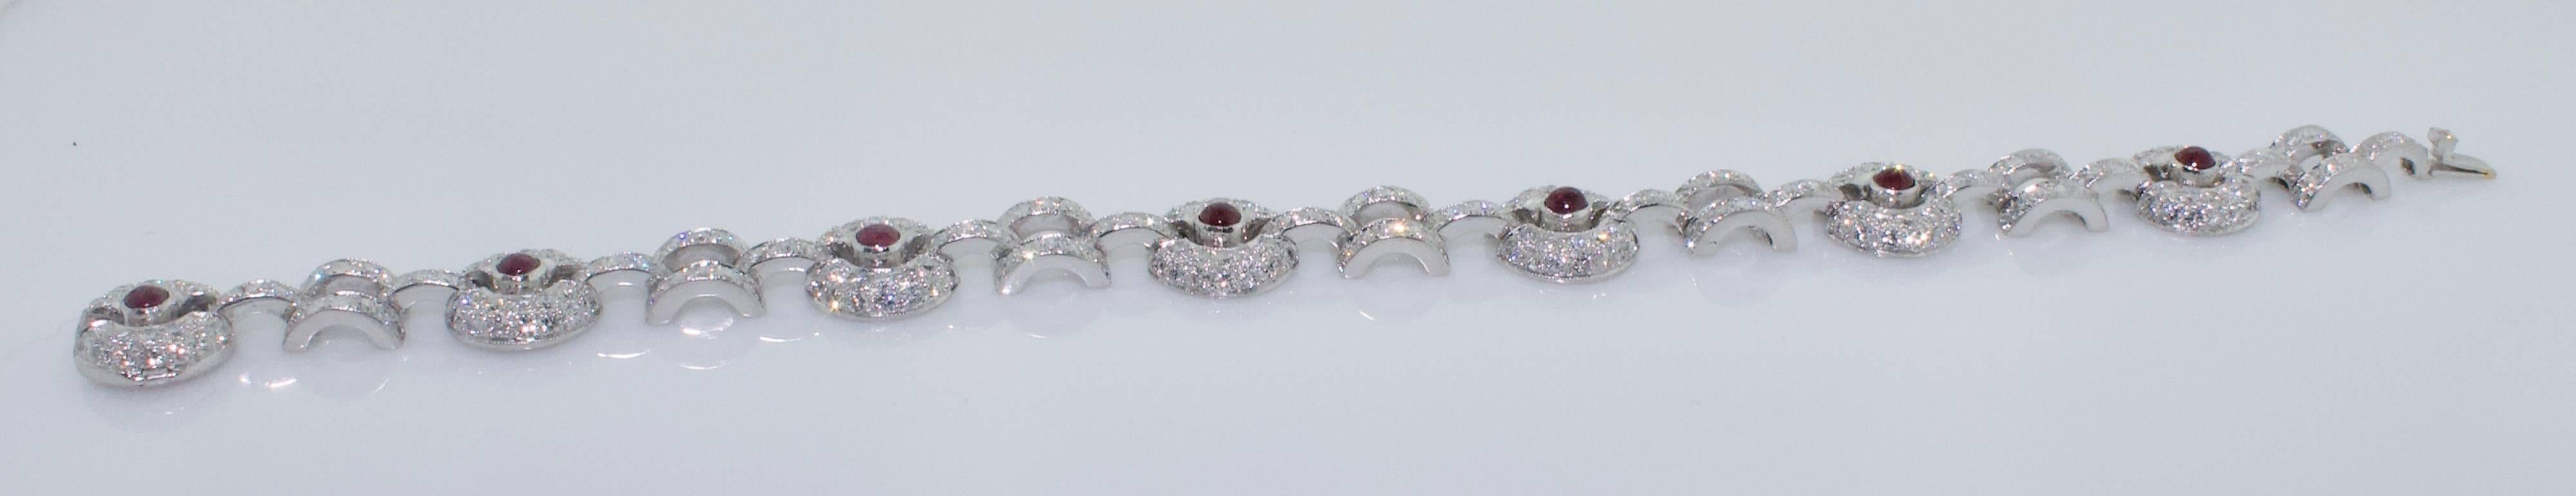 Cabochon Ruby and Diamond Bracelet
Seven Cabochon Cut Rubies weighing 1.00 carats approximately (Red and Bright)
Three Hundred and Sixty Four Round Brilliant Cut Diamonds weighing 7.50 carats approximately (GH VS-SI)
